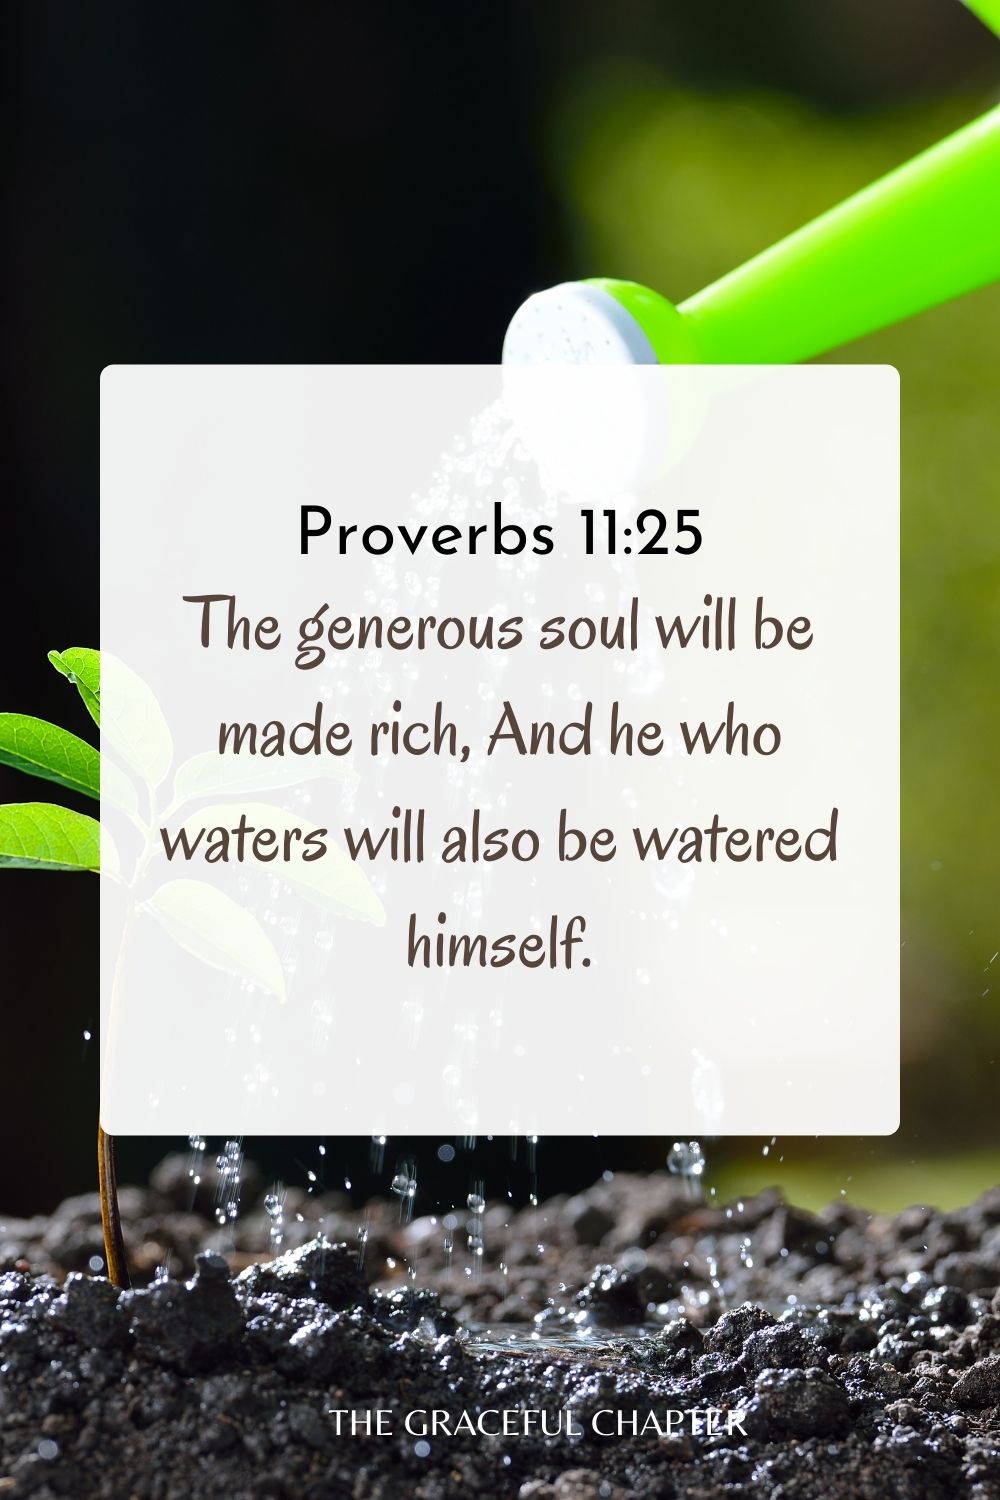 The generous soul will be made rich, And he who waters will also be watered himself. Proverbs 11:25